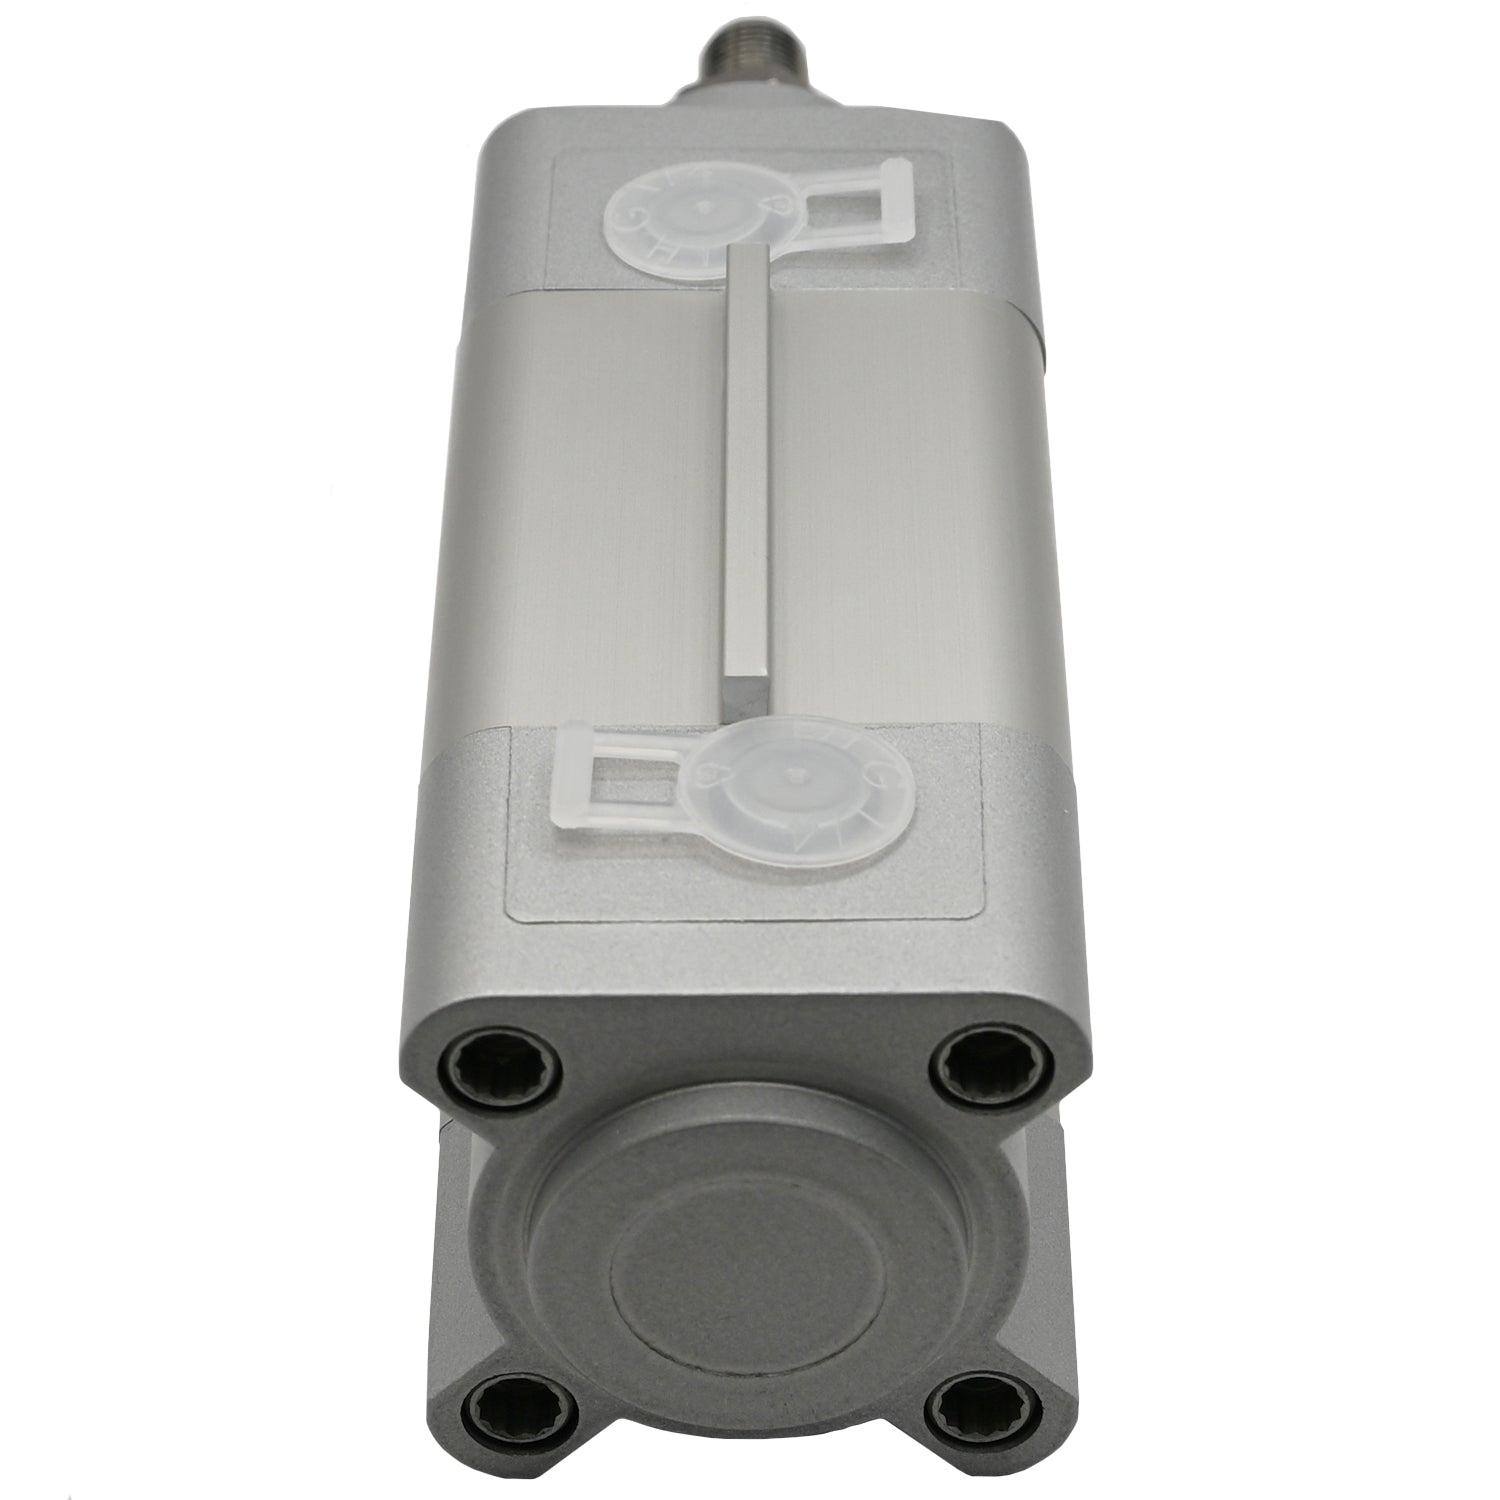 Pneumatic cylinder on white background. Cylinder's threaded cylinder rod and seal are shown